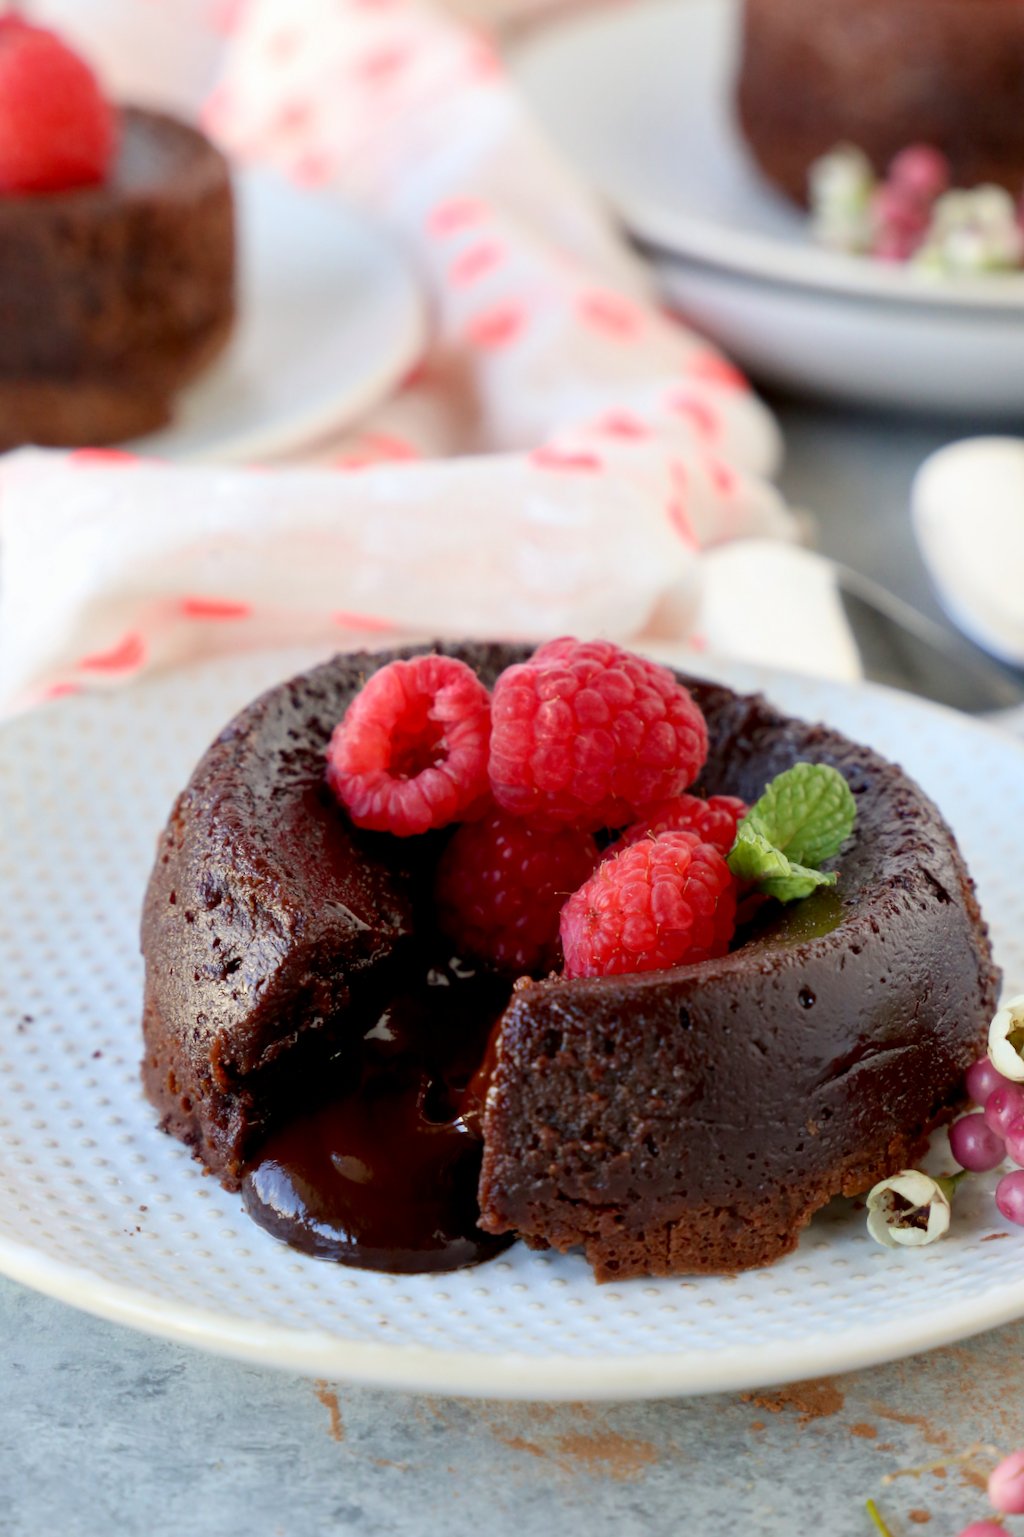 Close up of a molten chocolate cake garnished with raspberries and mint